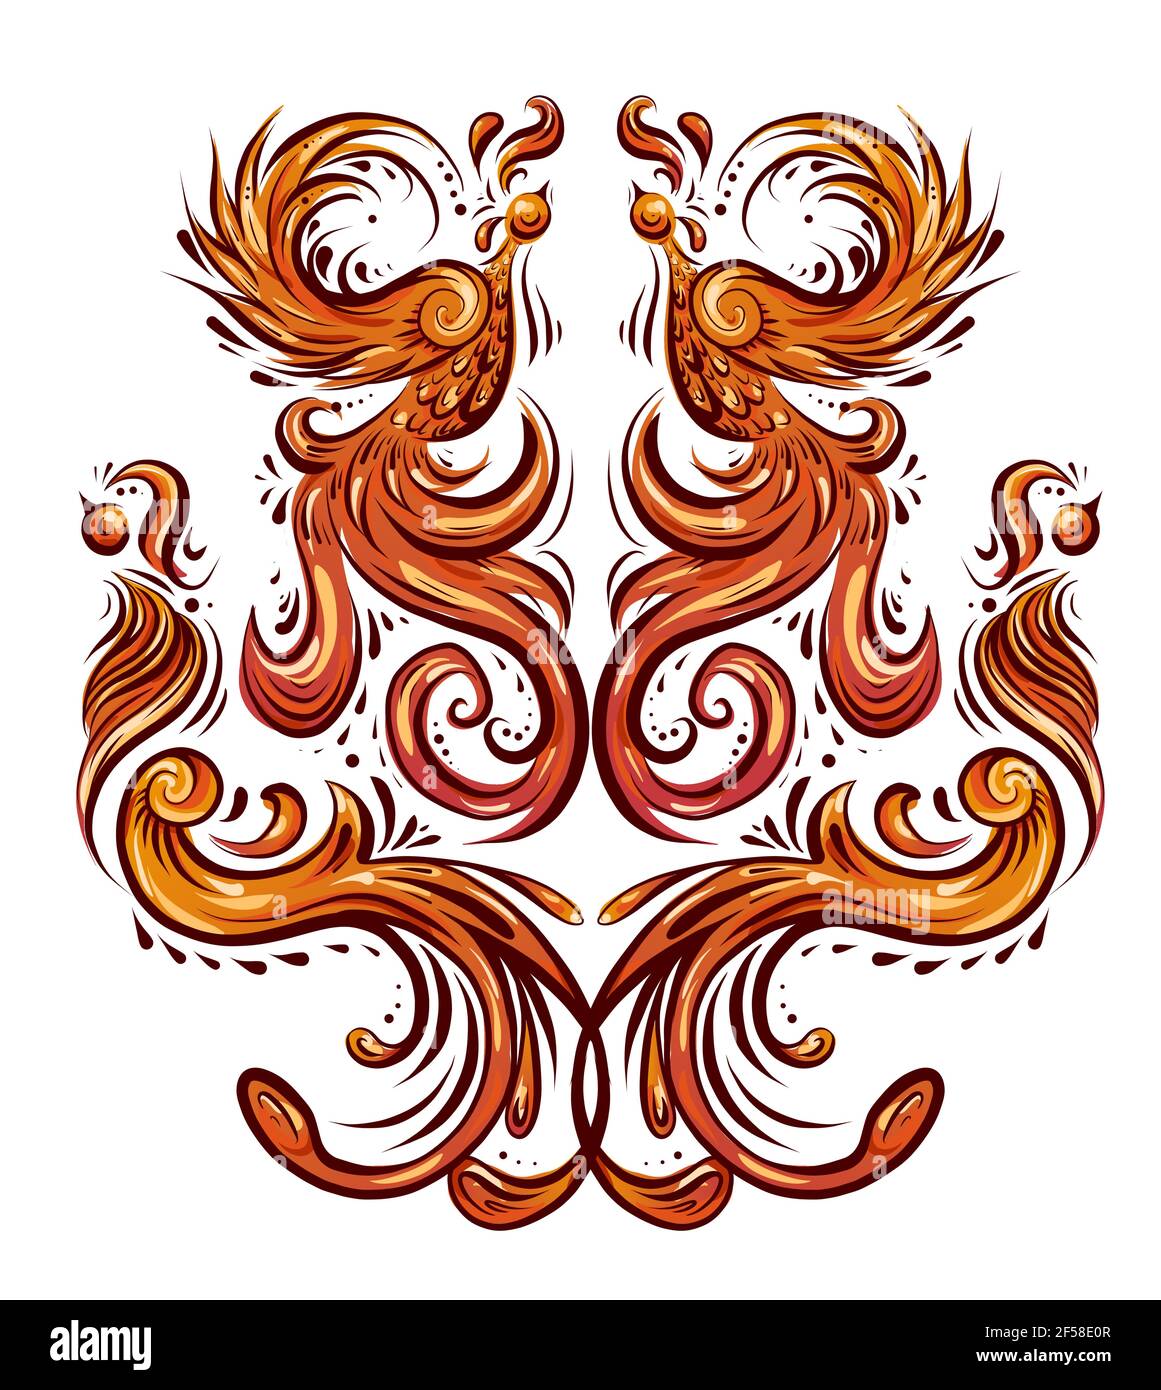 Colorful bird pattern with curled tails and wings. Symmetrical decoration in orange color. Vintage curled animal ornament. Phoenixes and peacocks. Vec Stock Vector